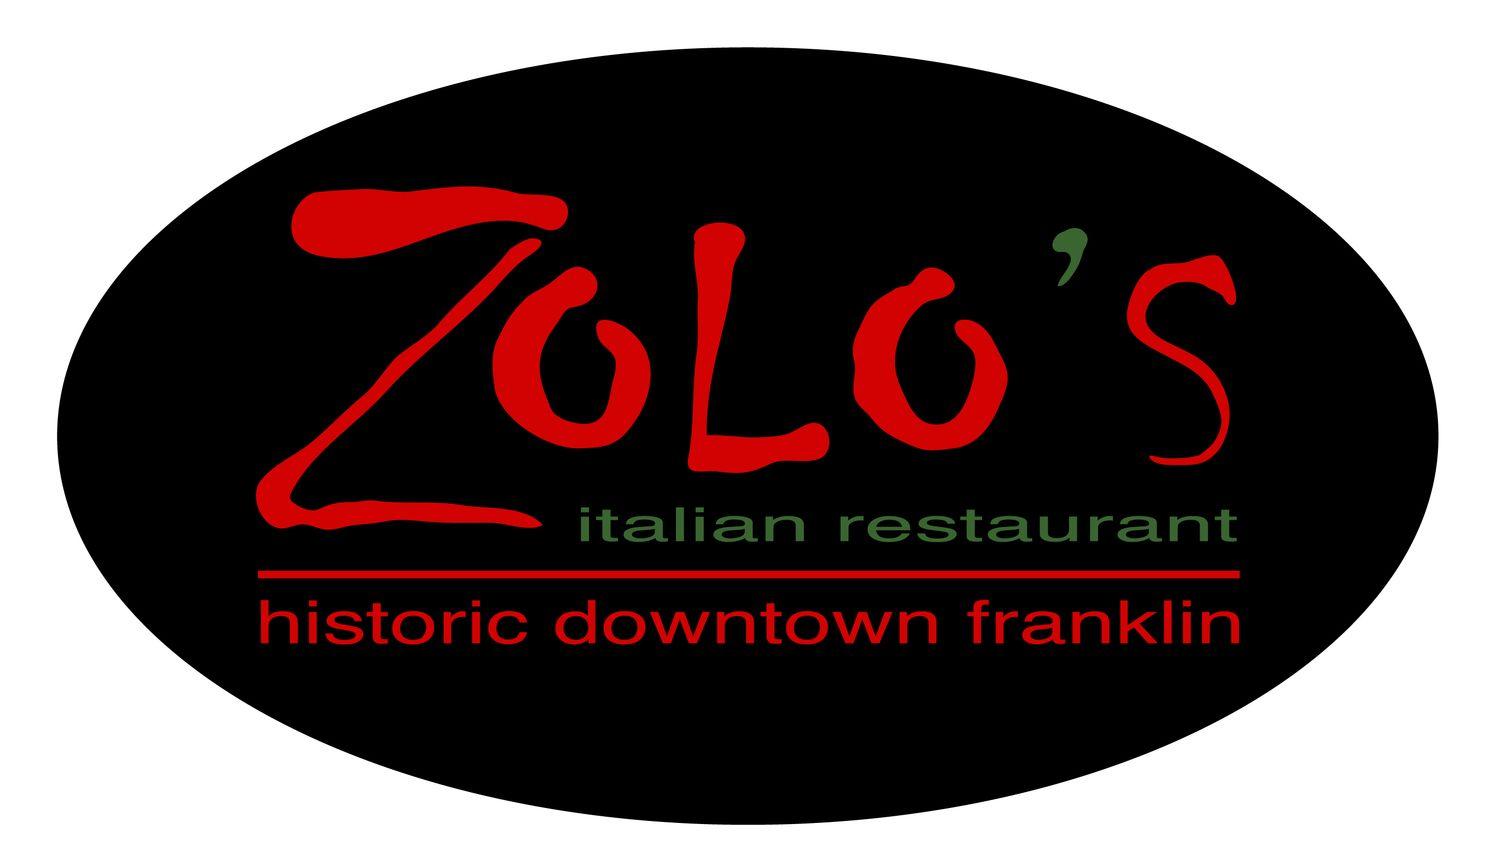 Restaurant with Red Circle Logo - Zolos Italian RestaurantZolo's Italian Restaurant